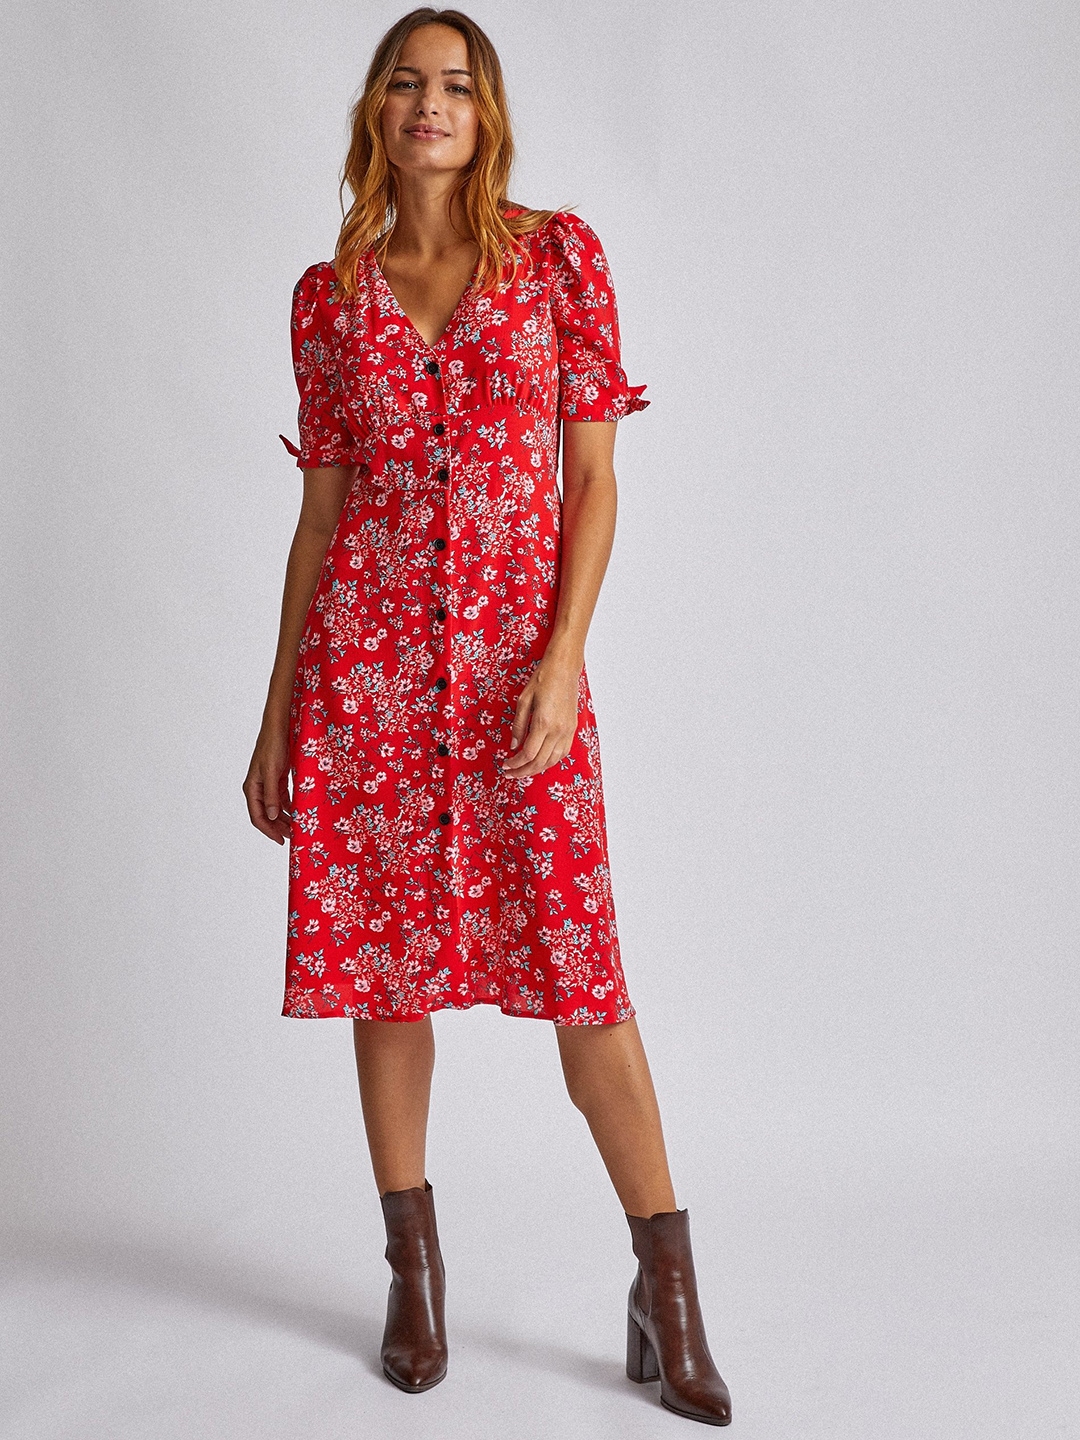 Buy DOROTHY PERKINS Women Red Floral Print A Line Dress - Dresses for ...